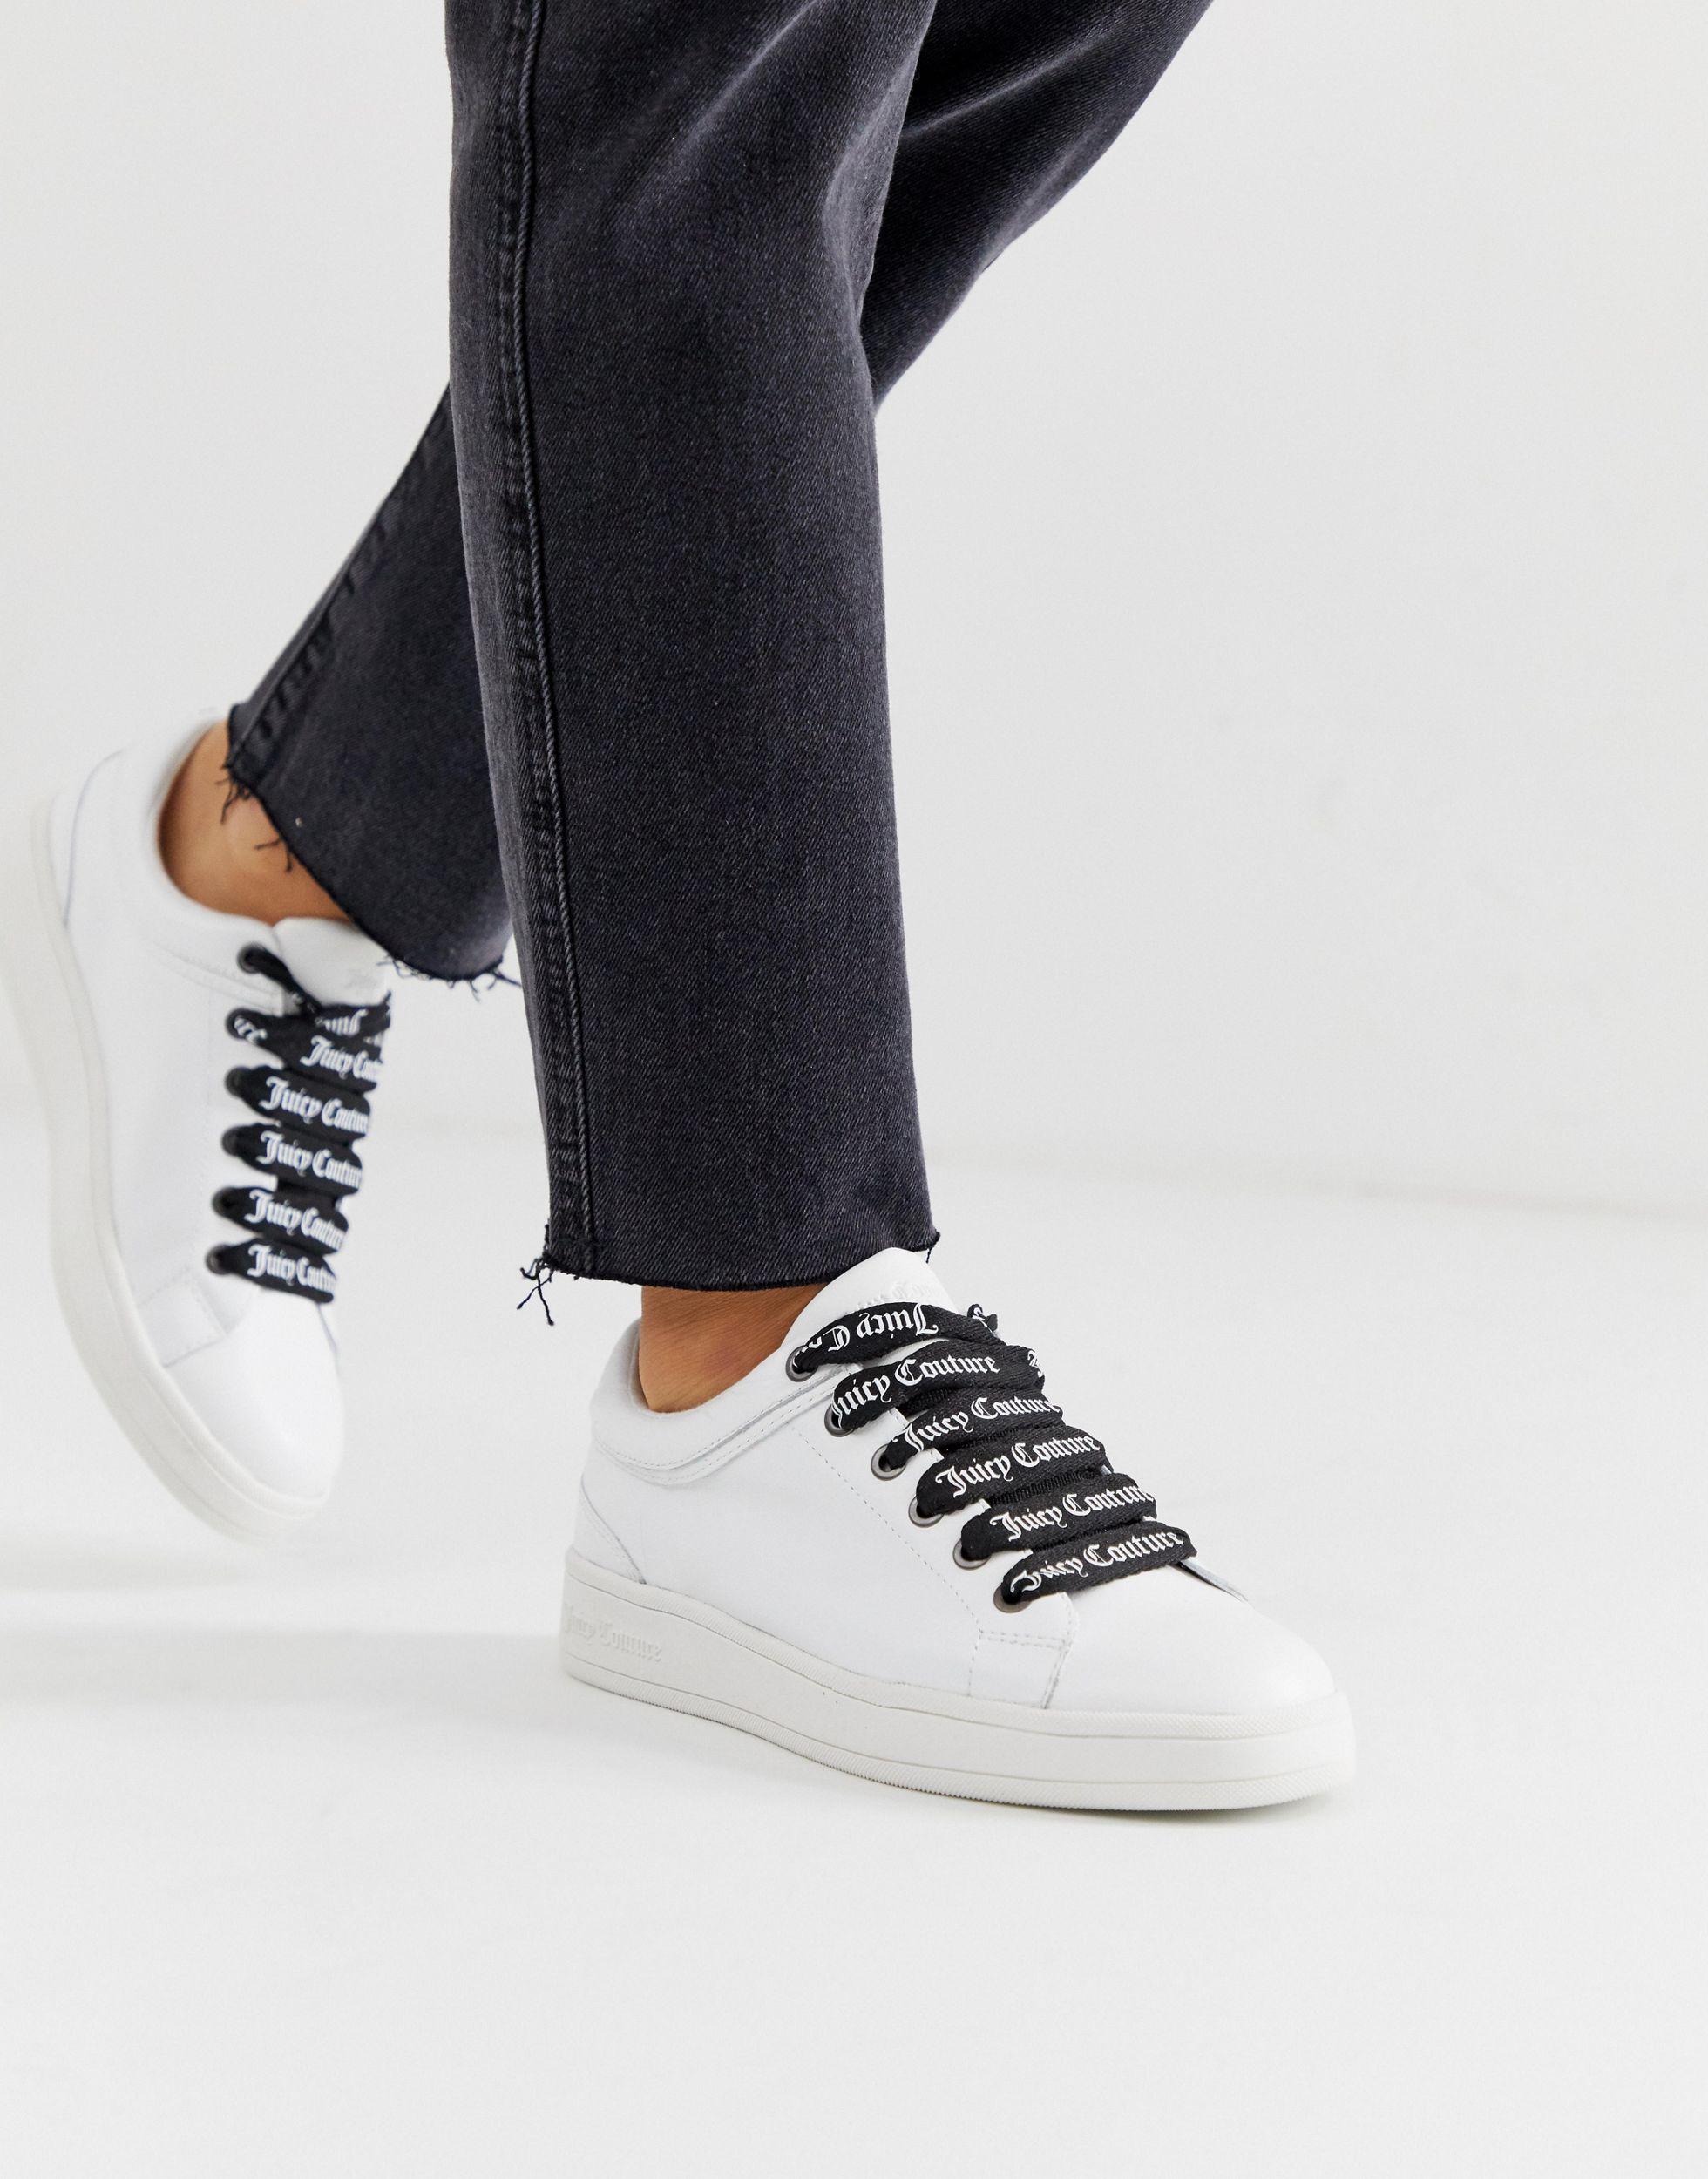 Juicy Leather Lace Up Sneakers White